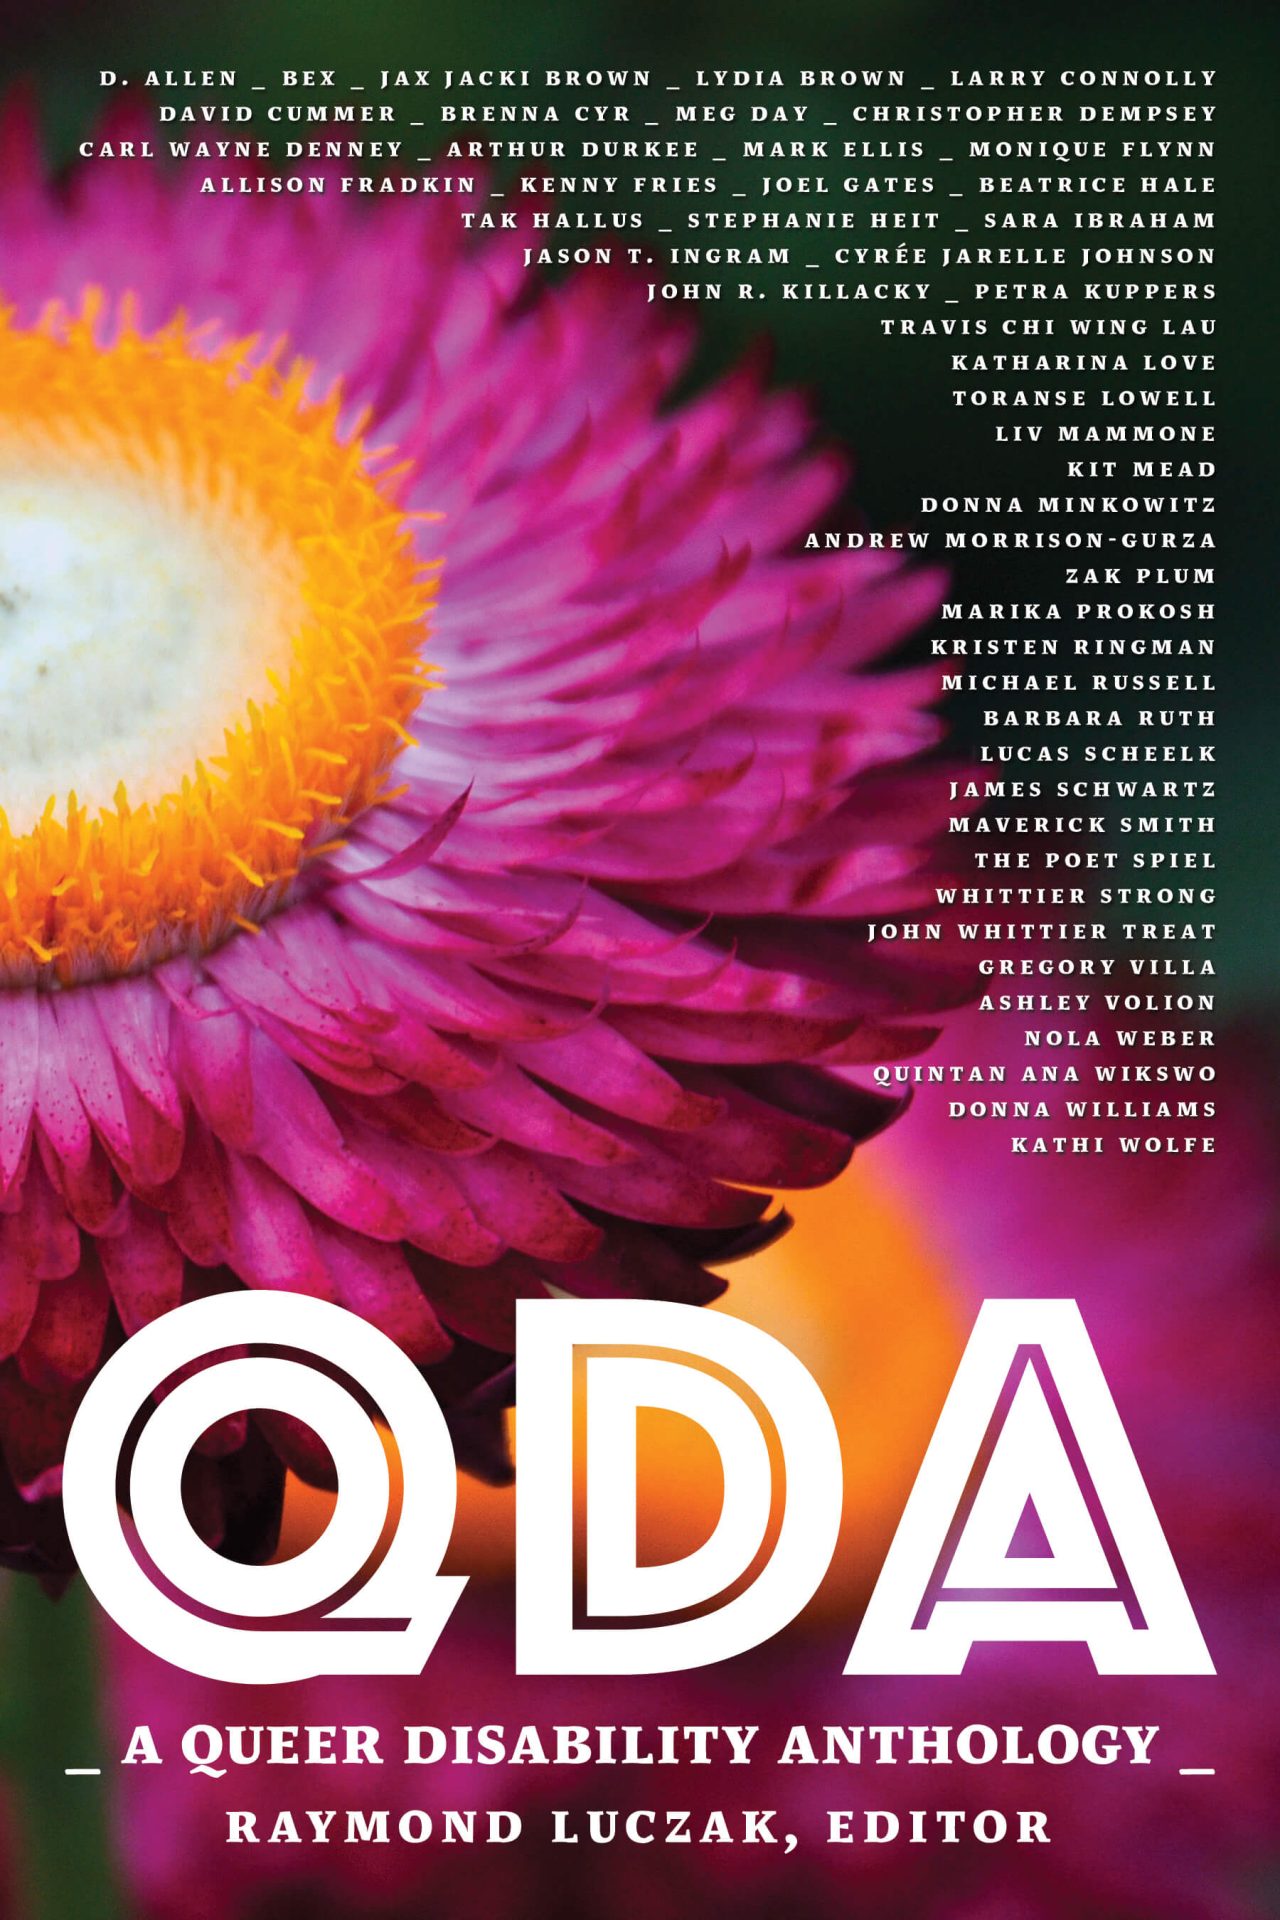 A flower with hot pink petals and a bright yellow crown with a white center on top is wrapped to the left. On the upper right hand side are author's names set in small type. Below the flower is the title in white QDA | A Queer Disability Anthology | Raymond Luczak, Editor.